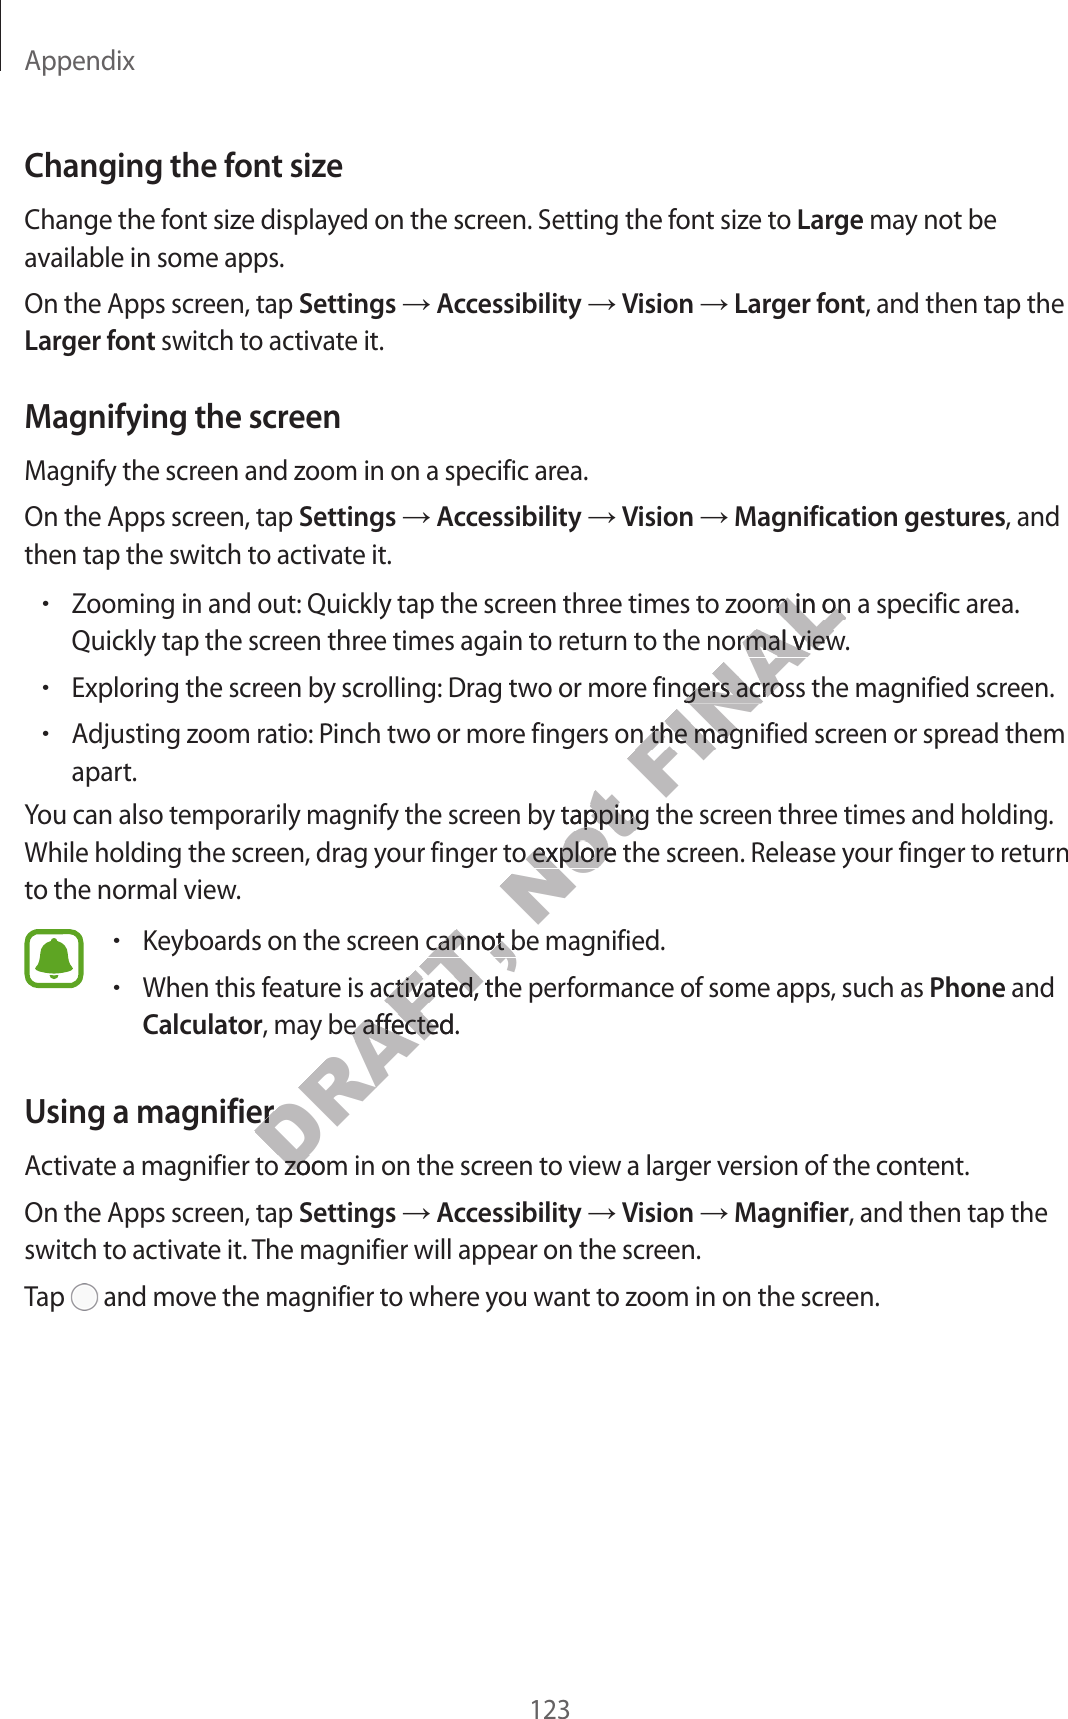 Appendix123Changing the font sizeChange the font size displayed on the screen. Setting the font size to Large may not be available in some apps.On the Apps screen, tap Settings ĺ Accessibility ĺ Vision ĺ Larger font, and then tap the Larger font switch to activate it.Magnifying the screenMagnify the screen and zoom in on a specific area.On the Apps screen, tap Settings ĺ Accessibility ĺ Vision ĺ Magnification gestures, and then tap the switch to activate it.•Zooming in and out: Quickly tap the screen three times to zoom in on a specific area.Quickly tap the screen three times again to return to the normal view.•Exploring the screen by scrolling: Drag two or more fingers across the magnified screen.•Adjusting zoom ratio: Pinch two or more fingers on the magnified screen or spread themapart.You can also temporarily magnify the screen by tapping the screen three times and holding. While holding the screen, drag your finger to explore the screen. Release your finger to return to the normal view.•Keyboards on the screen cannot be magnified.•When this feature is activated, the performance of some apps, such as Phone andCalculator, may be affected.Using a magnifierActivate a magnifier to zoom in on the screen to view a larger version of the content.On the Apps screen, tap Settings ĺ Accessibility ĺ Vision ĺ Magnifier, and then tap the switch to activate it. The magnifier will appear on the screen.Tap   and move the magnifier to where you want to zoom in on the screen.DRAFT, een cannot be mageen cannot be mage is activated, the pere is activated, the perDRAFT, y be affected.y be affectednifiernifiernifier to zoom in on the scrnifier to zoom in on the scrNot een by tapping the scry tapping the scrour finger to explore the scrour finger to explore the scrFINALoom in on a specific aroom in on a specific aro the normal viewo the normal viewe fingers across the mage fingers across the mage fingers on the magnified scre fingers on the mag